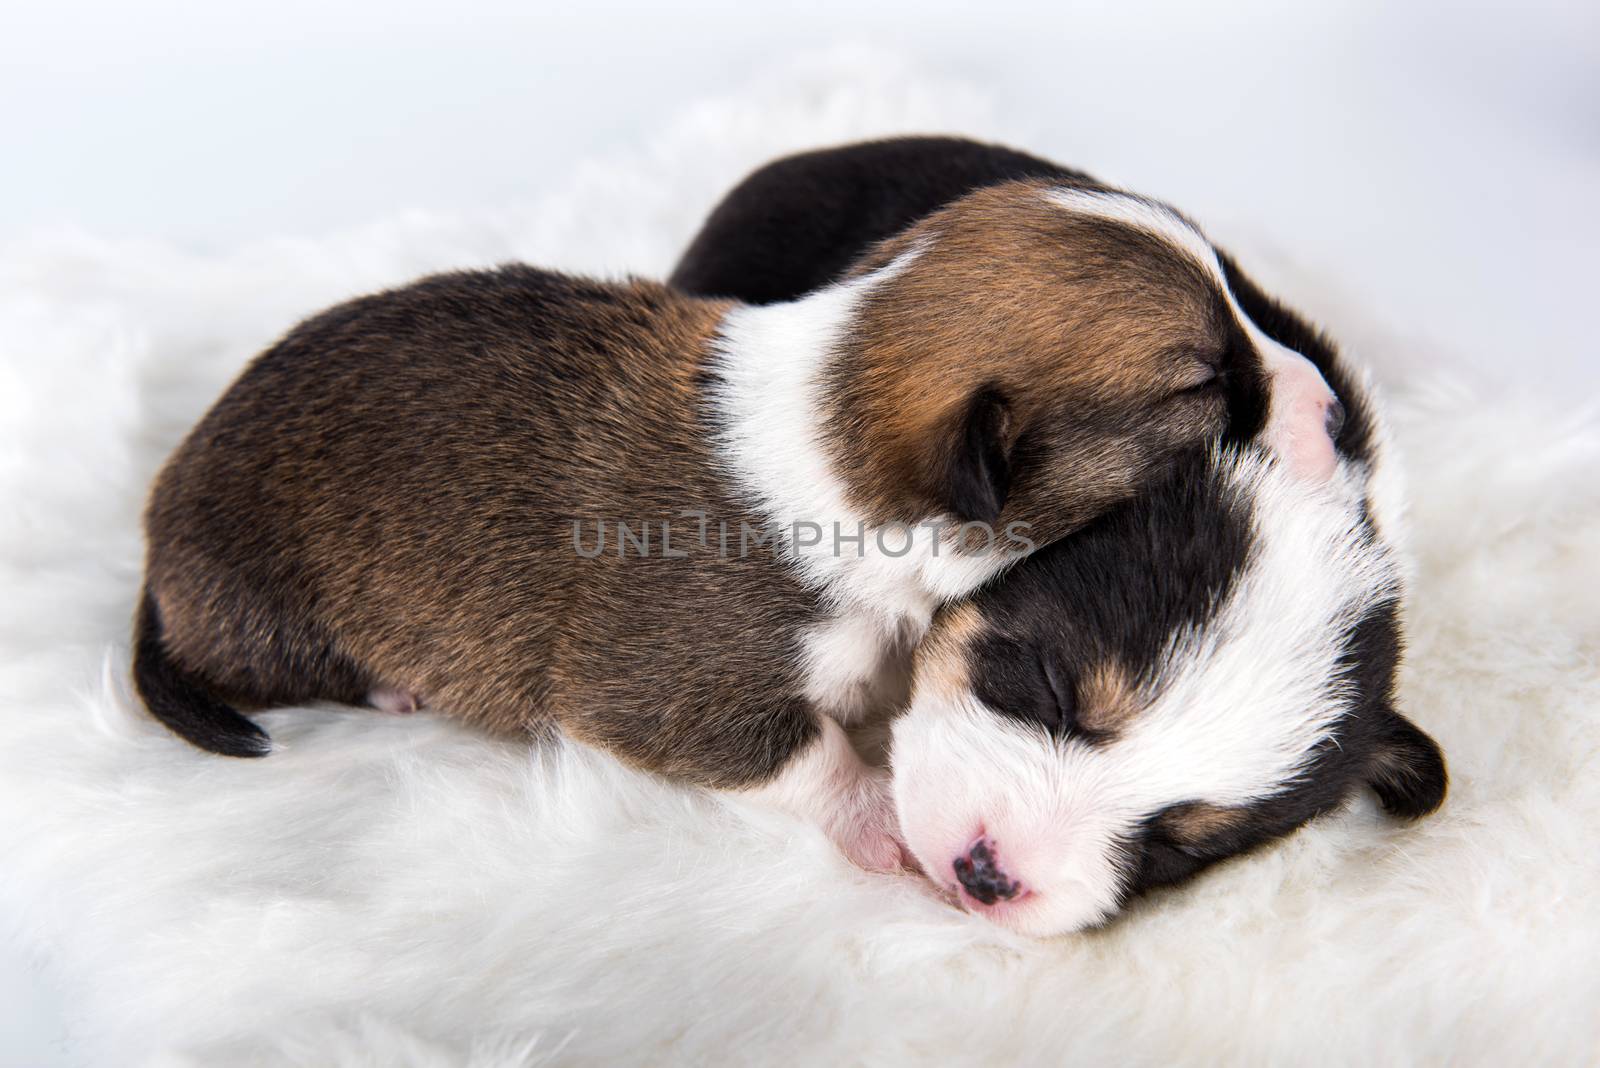 Two Pembroke Welsh Corgi puppies dogs isolated on white background